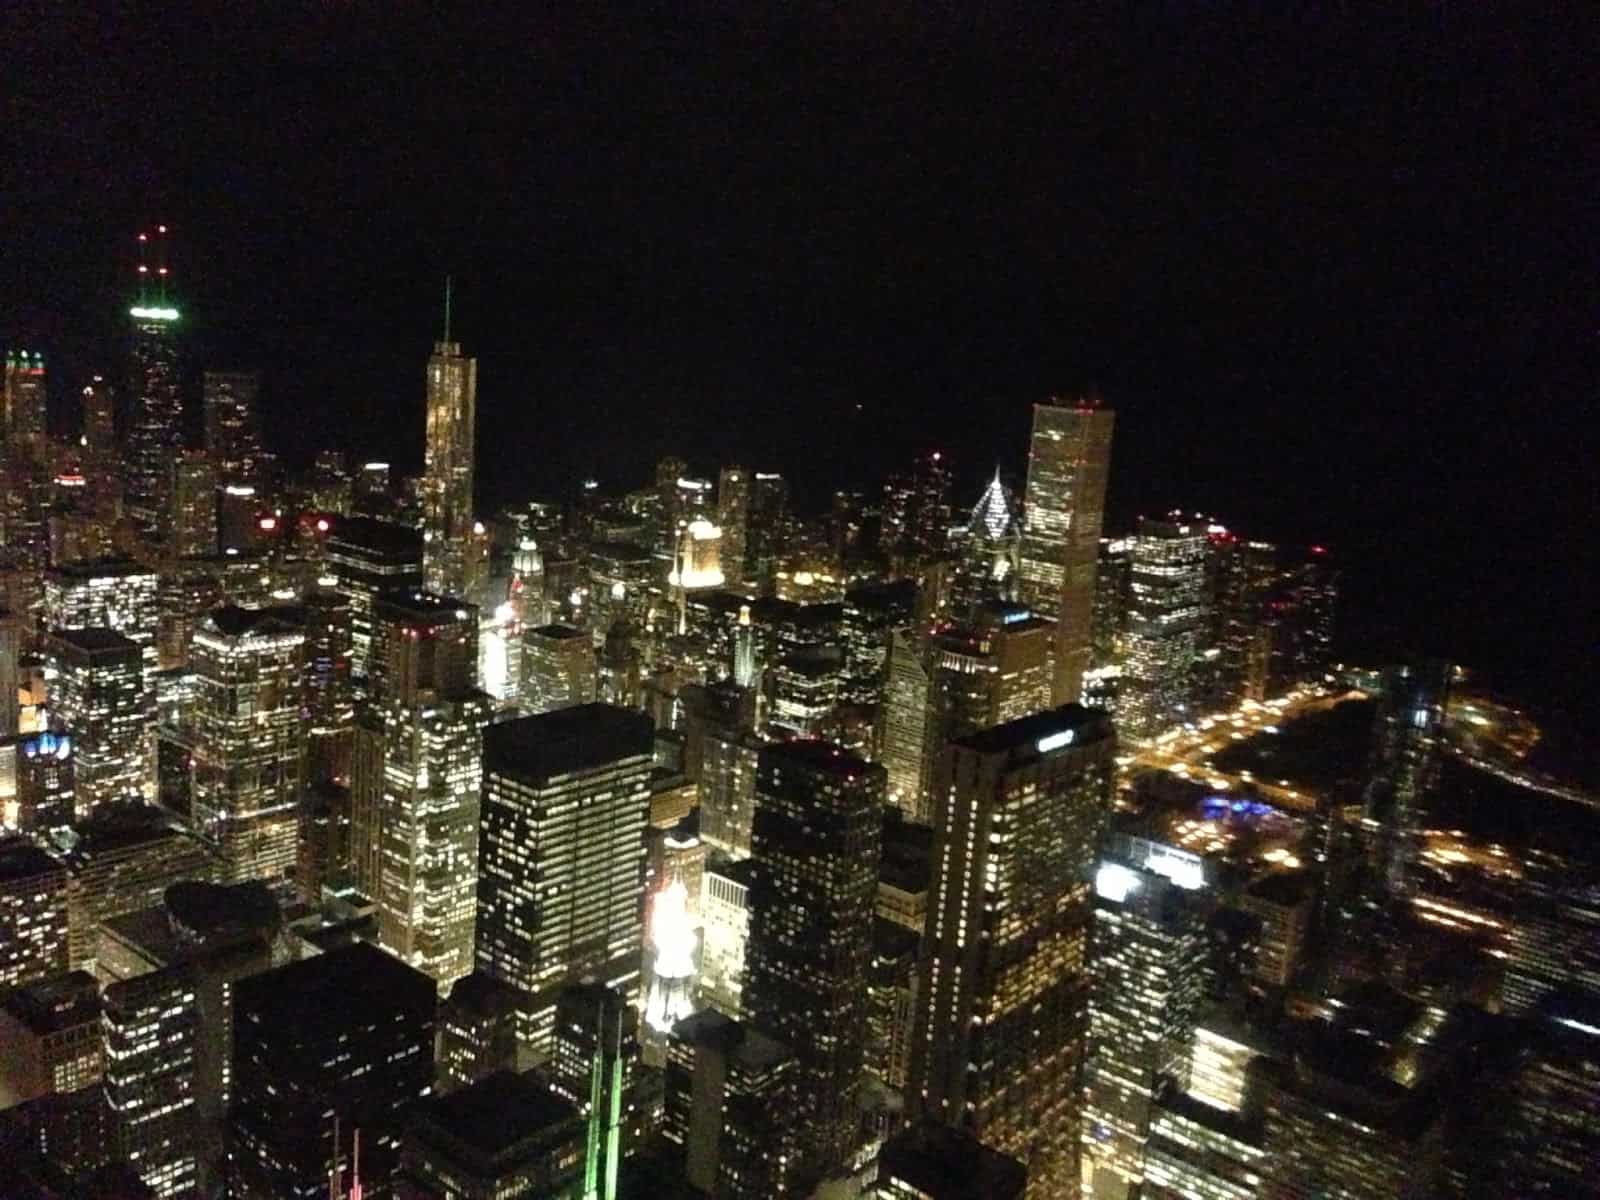 Skydeck at Willis Tower (Sears Tower) in Chicago